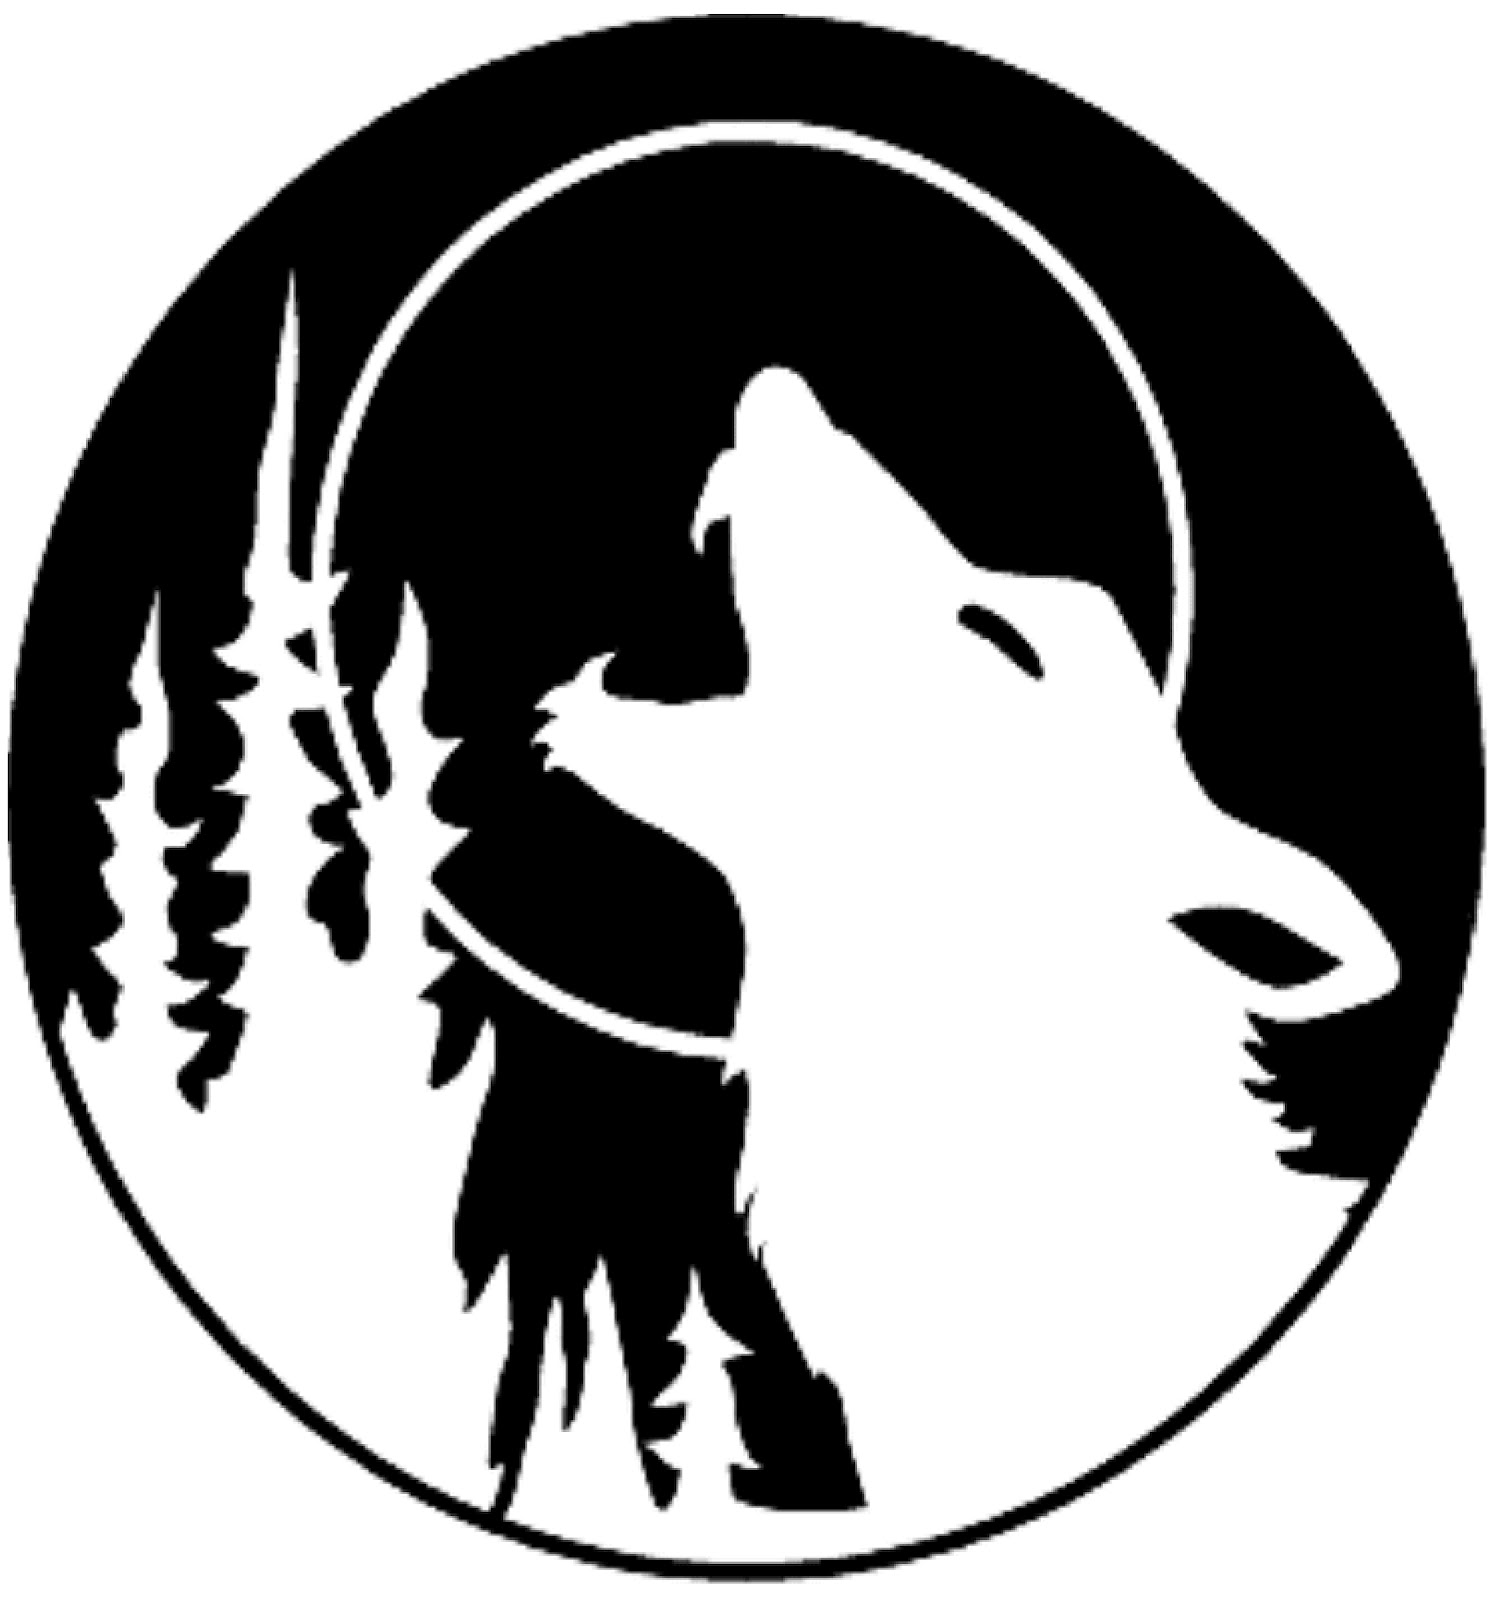 Howling Wolf Outline - Clipart library